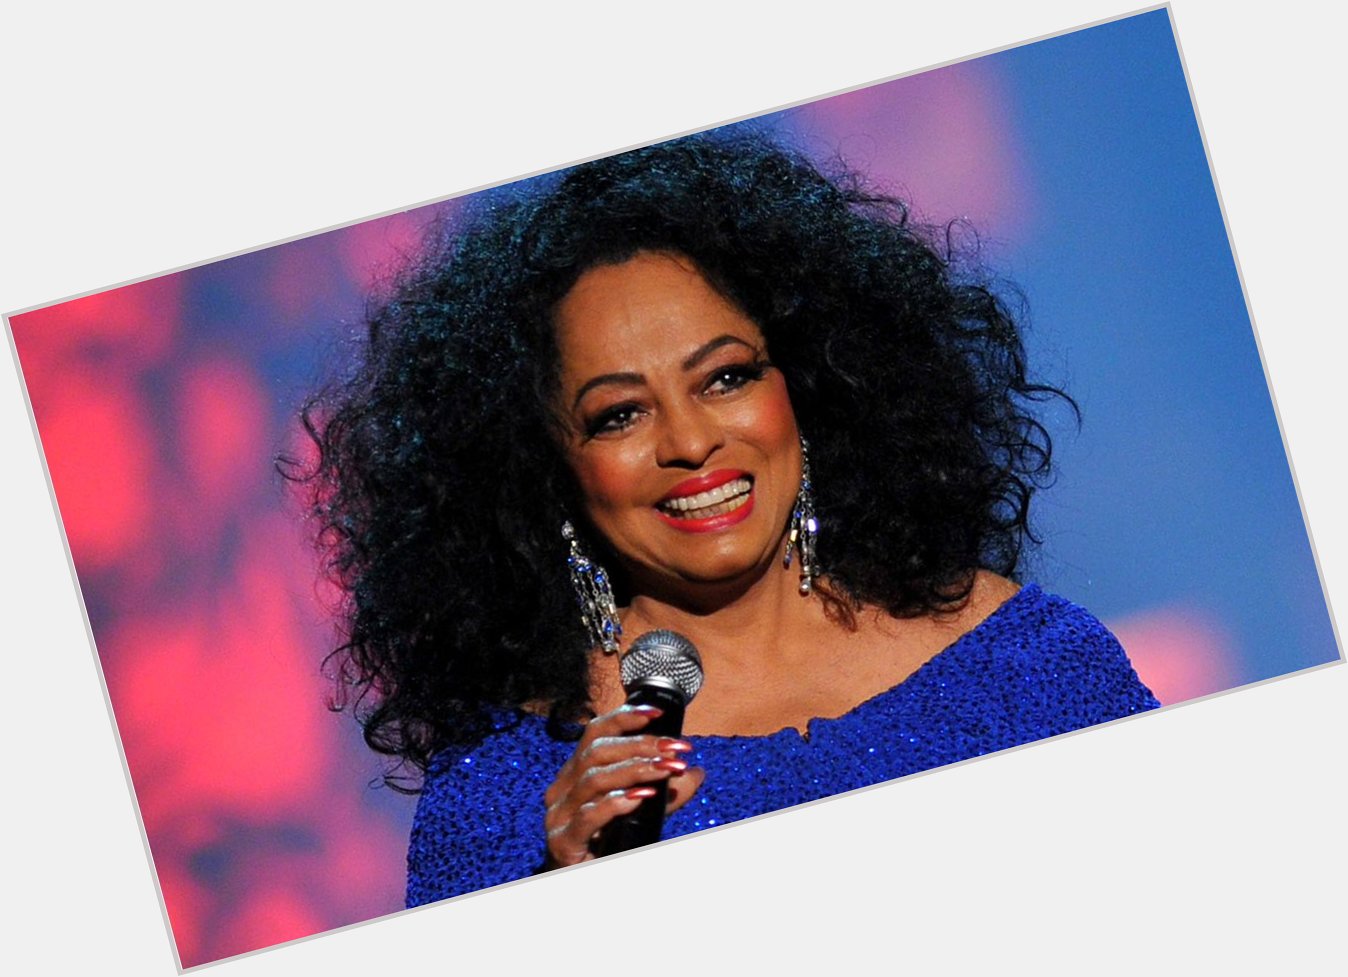 A Big BOSS Happy Birthday today to Diana Ross from all of us at The Boss! 